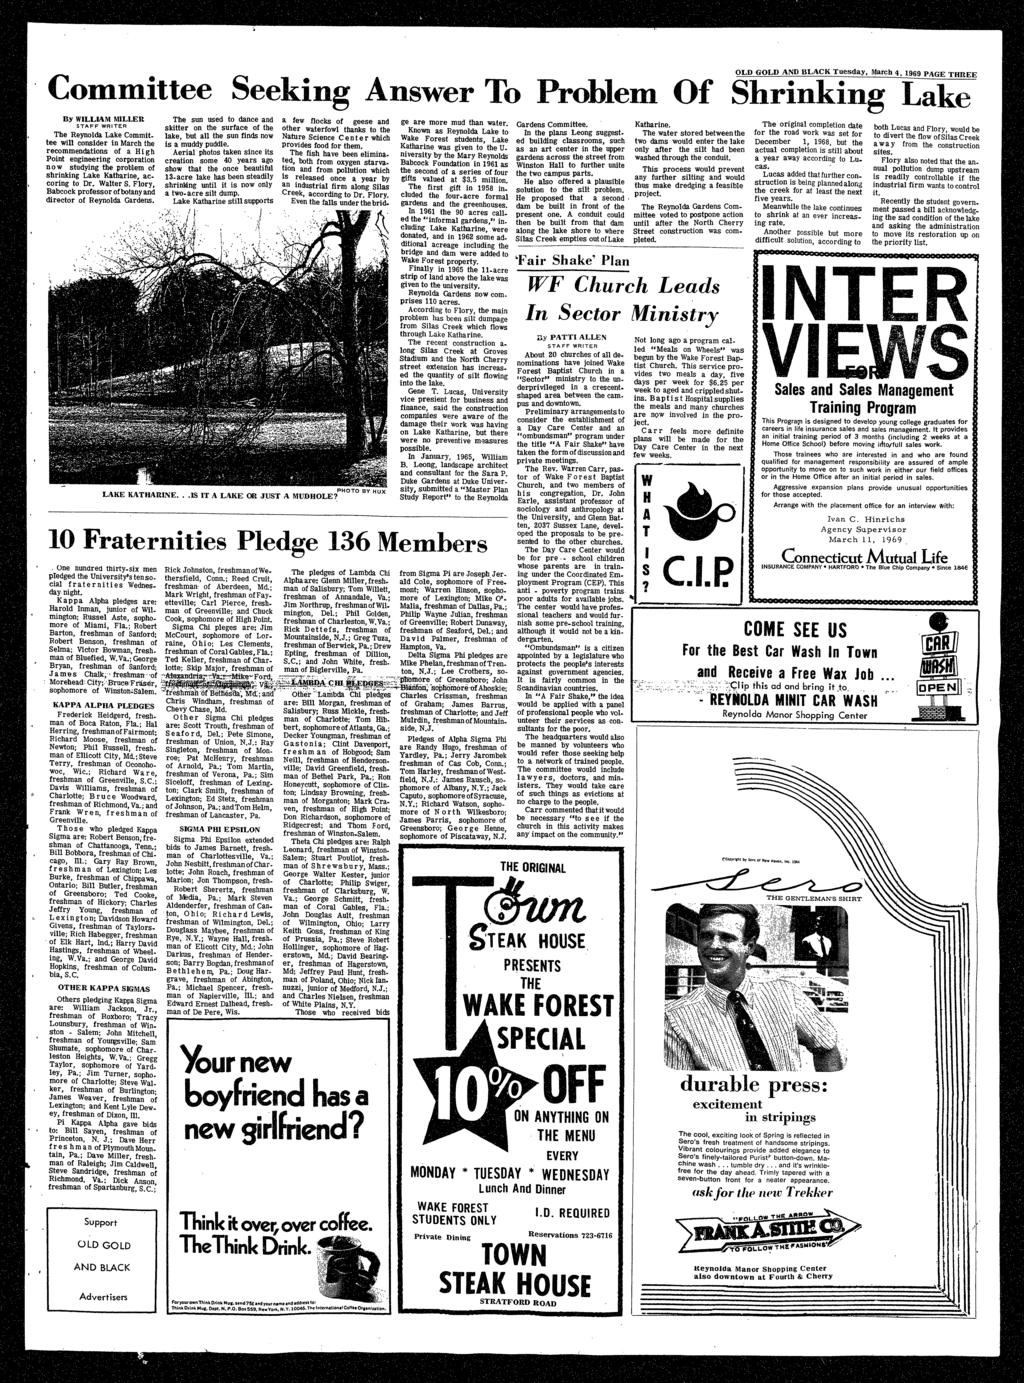 Commiee OLD GOLD AND BLACK Tuesday, March 4, 1969 PAGE THREE Seeking Answer To Problem Of Shrinking Lake By WLLAM MLLER STAFF WRTER The Reynolda Lake Commi.